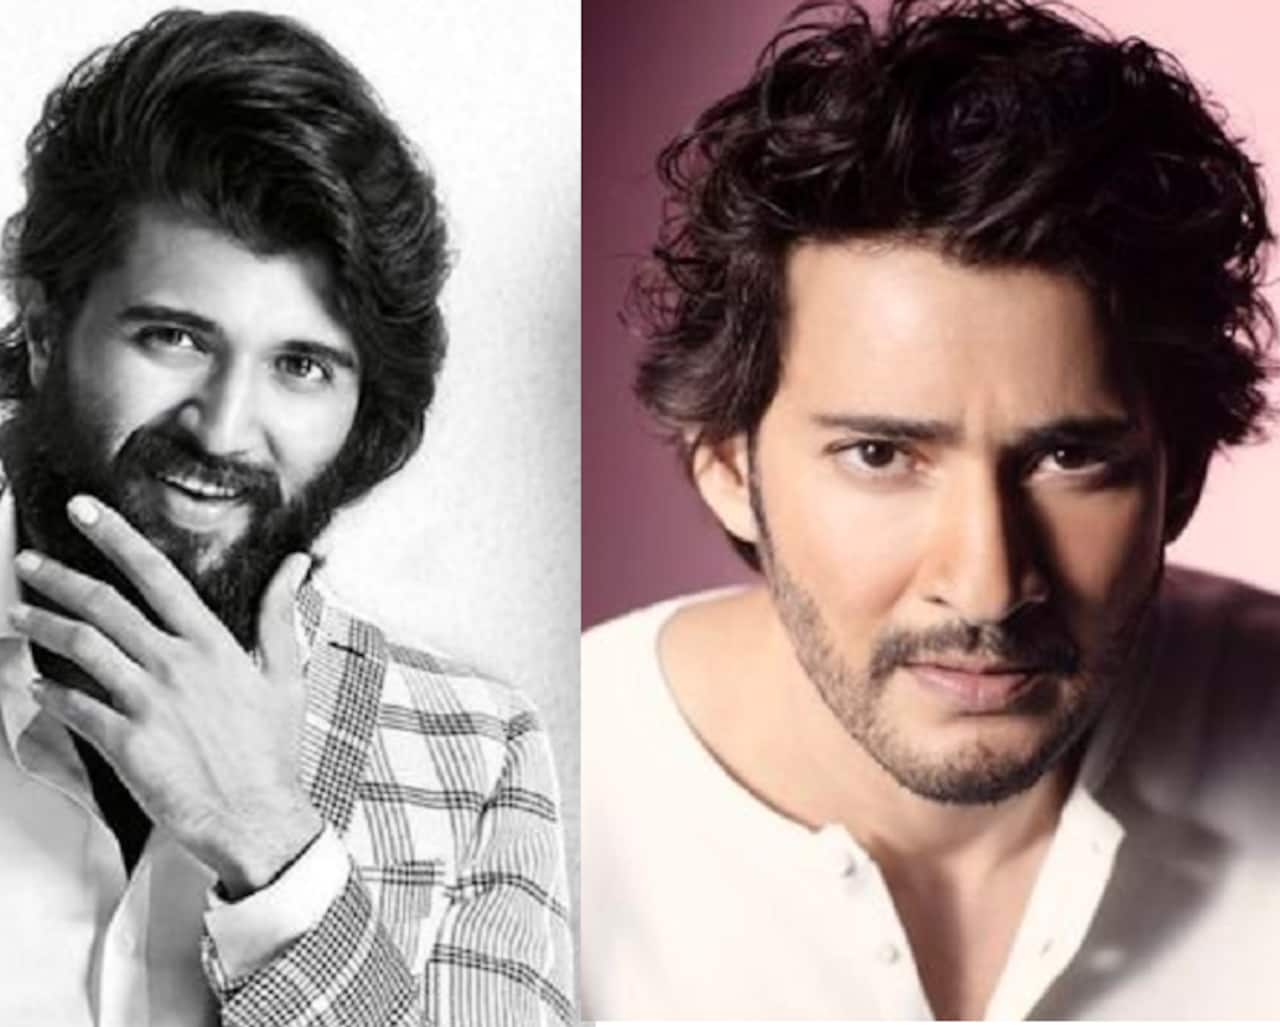 Trending South News Today: Reason why Mahesh Babu did not shave his head after father's death; Vijay Deverakonda to join Prabhas in Salaar and more